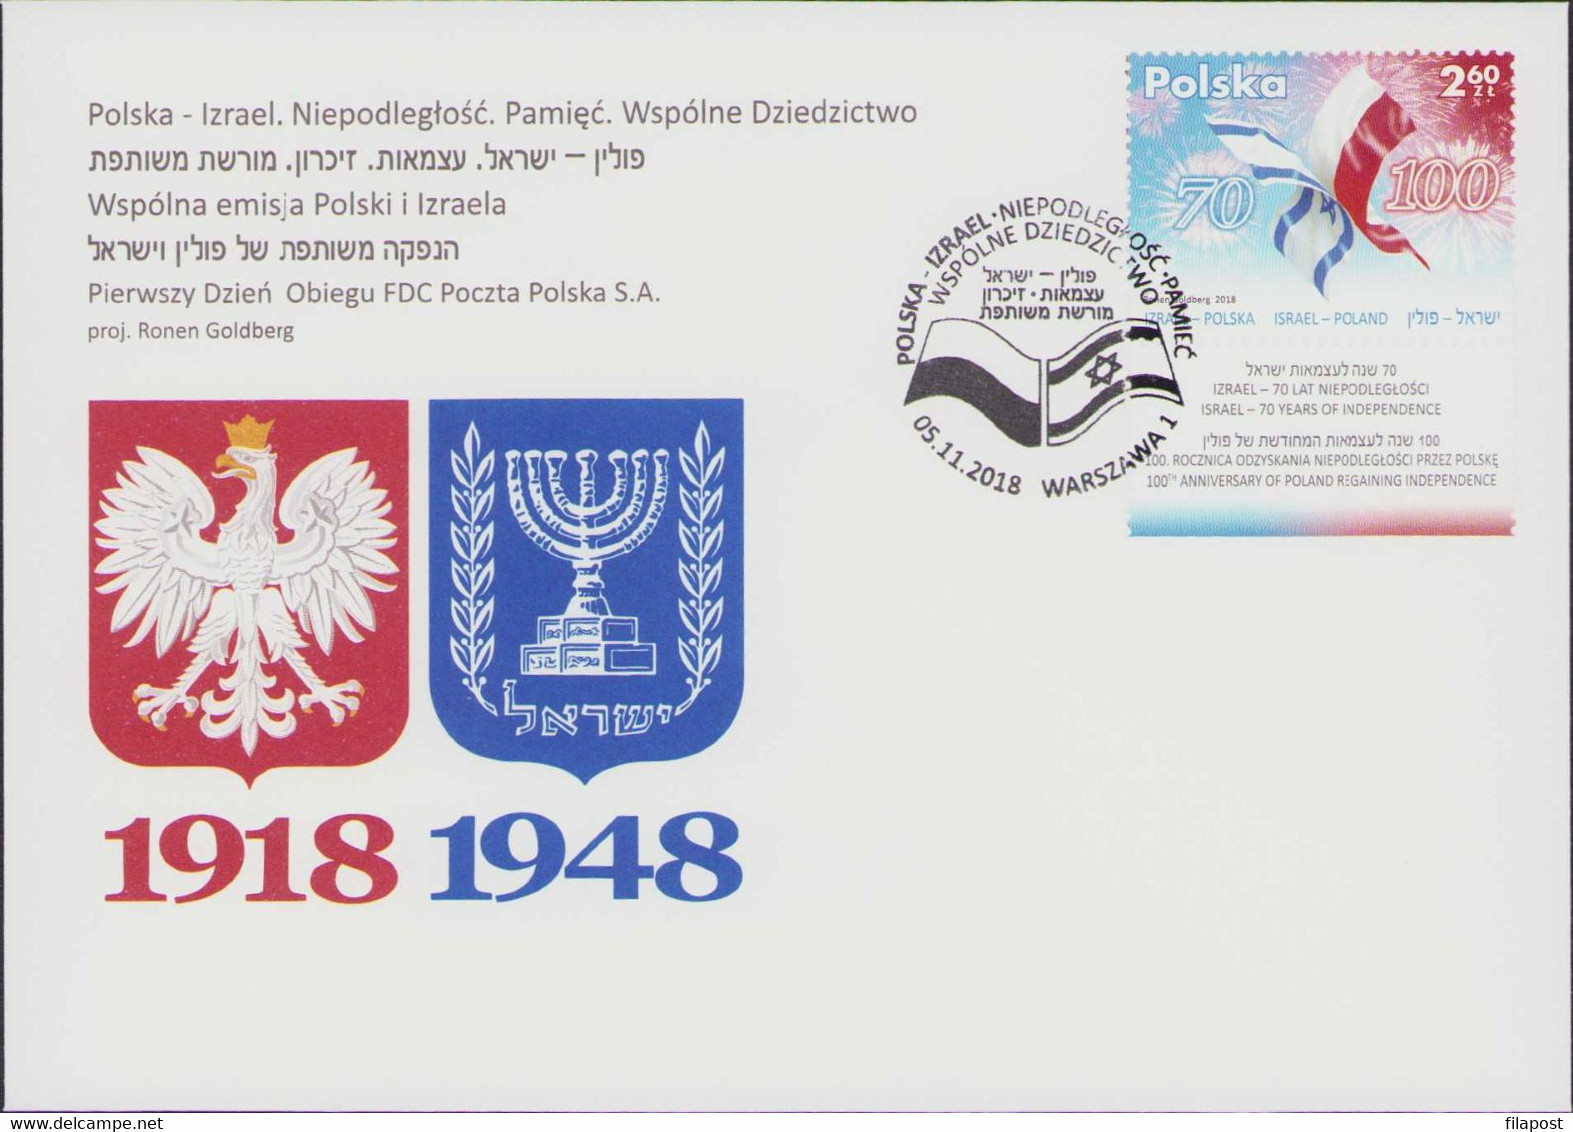 2018 Poland - Israel Joint Issue Booklet Mi 5034 Flag Independence / Memory Common Heritage, FDC + 2 Stamps MNH** FV - Libretti